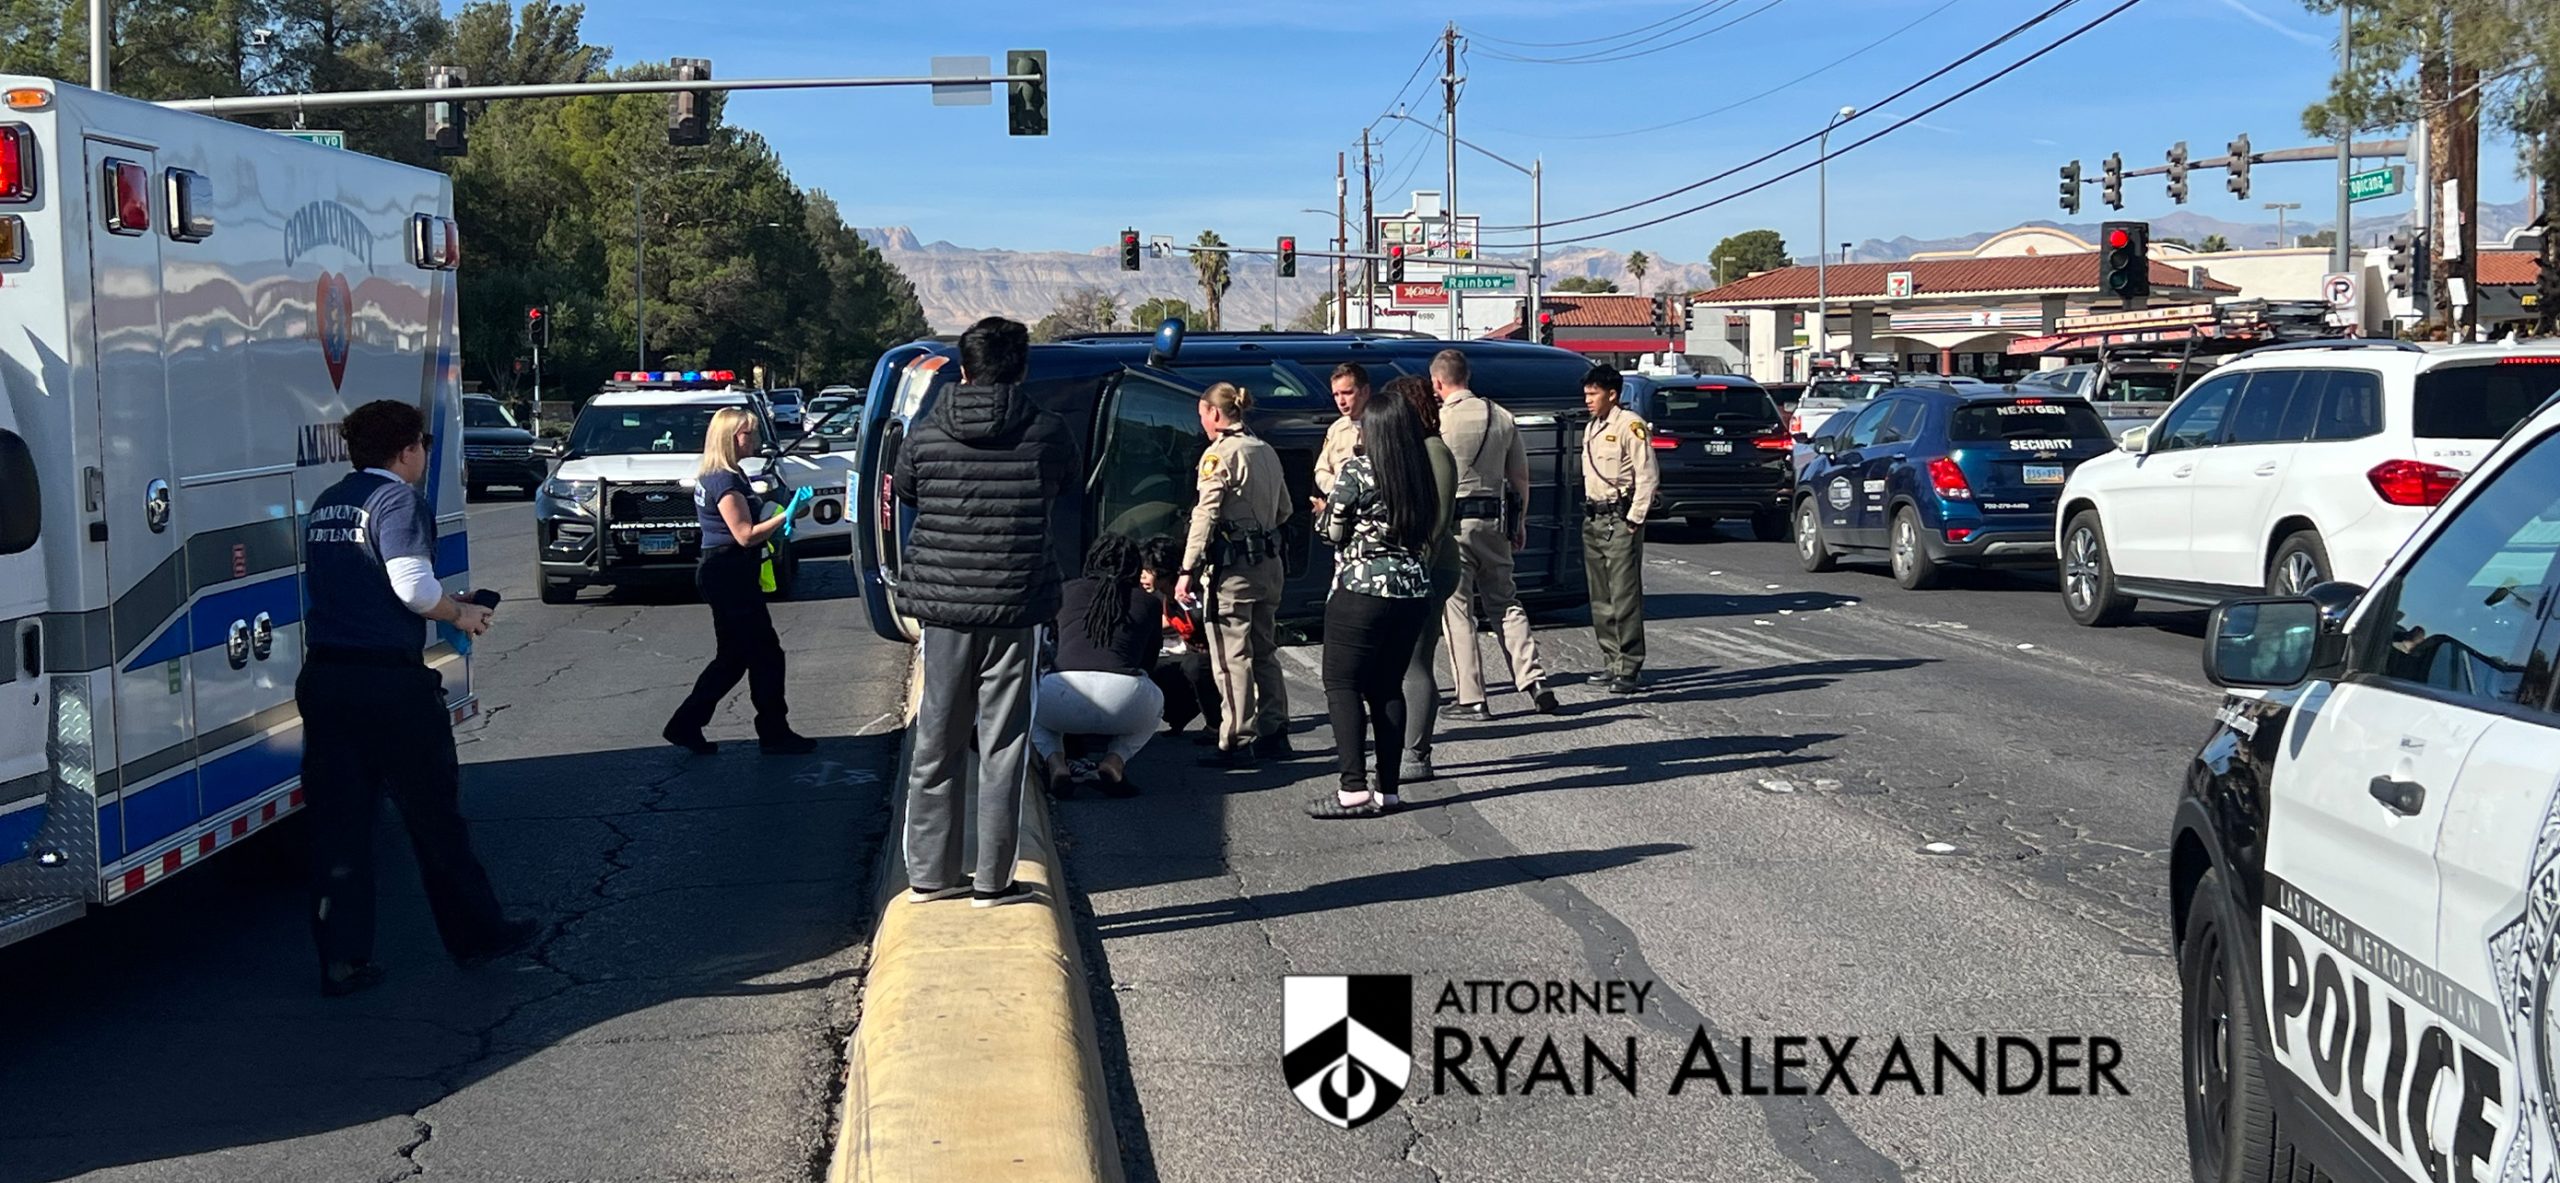 more accidents in the summer or winter - #1 las vegas personal Injury Attorney - Ryan Alexander